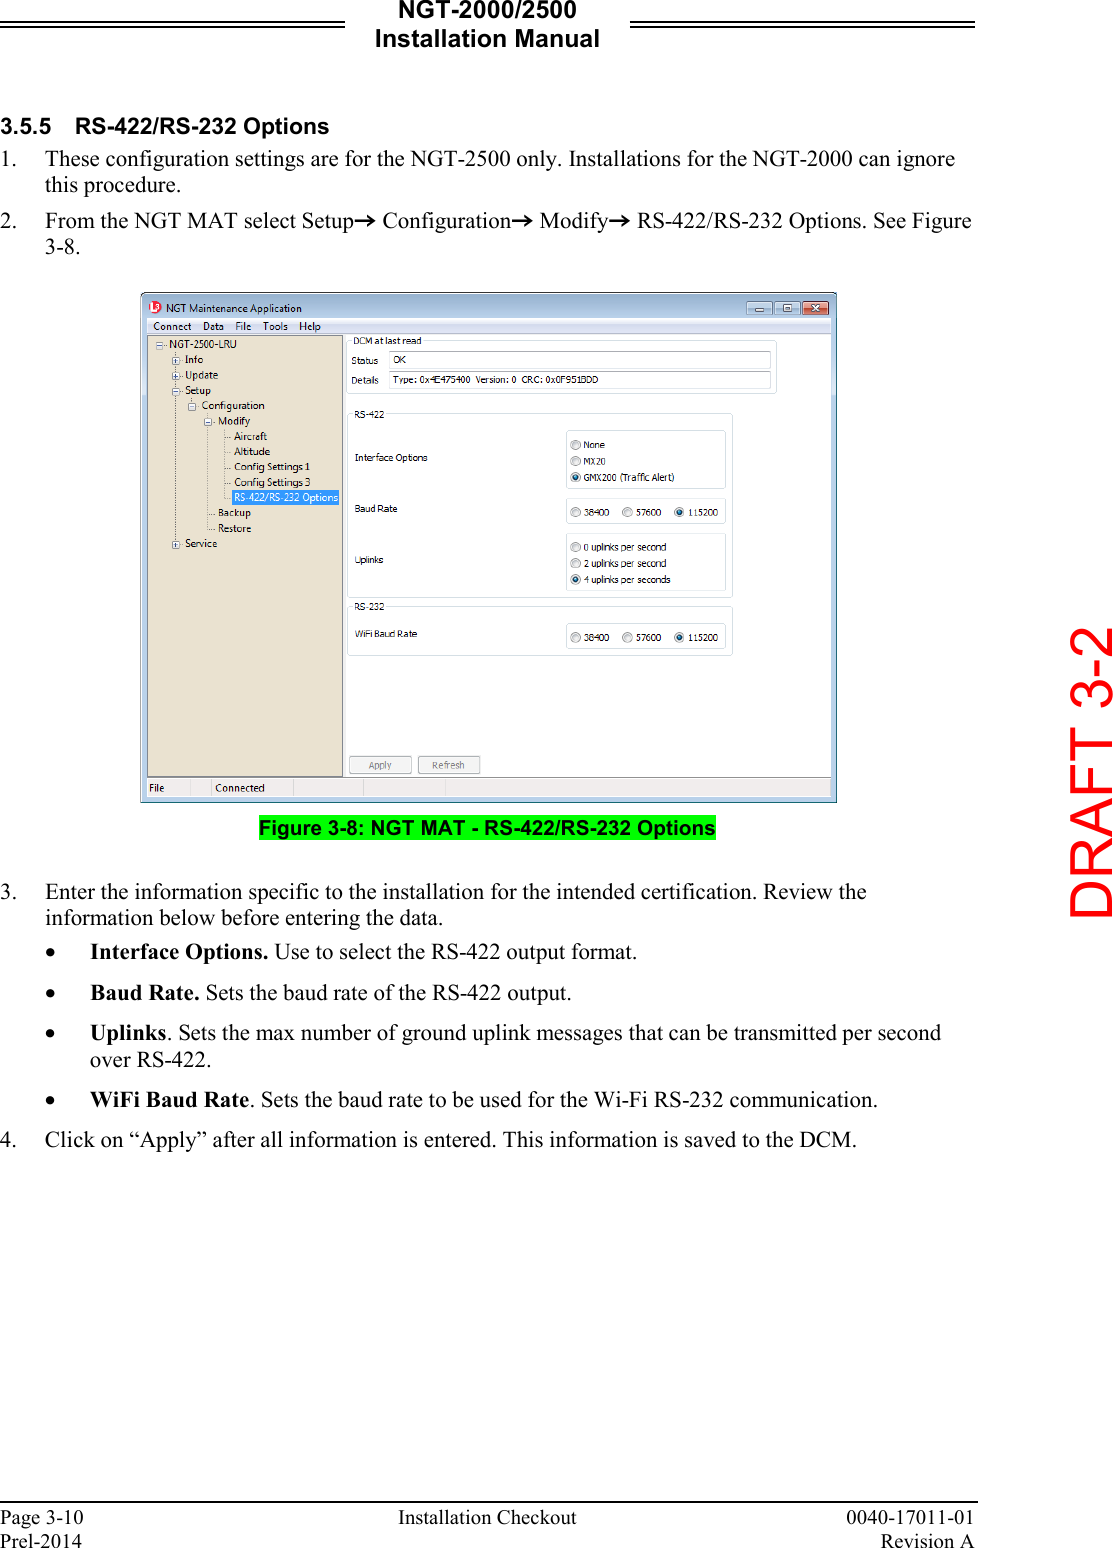 NGT-2000/2500 Installation Manual  Page 3-10    Installation Checkout 0040-17011-01 Prel-2014    Revision A  3.5.5 RS-422/RS-232 Options 1. These configuration settings are for the NGT-2500 only. Installations for the NGT-2000 can ignore this procedure.  2. From the NGT MAT select SetupZ ConfigurationZ ModifyZ RS-422/RS-232 Options. See Figure 3-8.     Figure 3-8: NGT MAT - RS-422/RS-232 Options  3. Enter the information specific to the installation for the intended certification. Review the information below before entering the data. • Interface Options. Use to select the RS-422 output format.  • Baud Rate. Sets the baud rate of the RS-422 output.  • Uplinks. Sets the max number of ground uplink messages that can be transmitted per second over RS-422. • WiFi Baud Rate. Sets the baud rate to be used for the Wi-Fi RS-232 communication.  4. Click on “Apply” after all information is entered. This information is saved to the DCM.     DRAFT 3-2